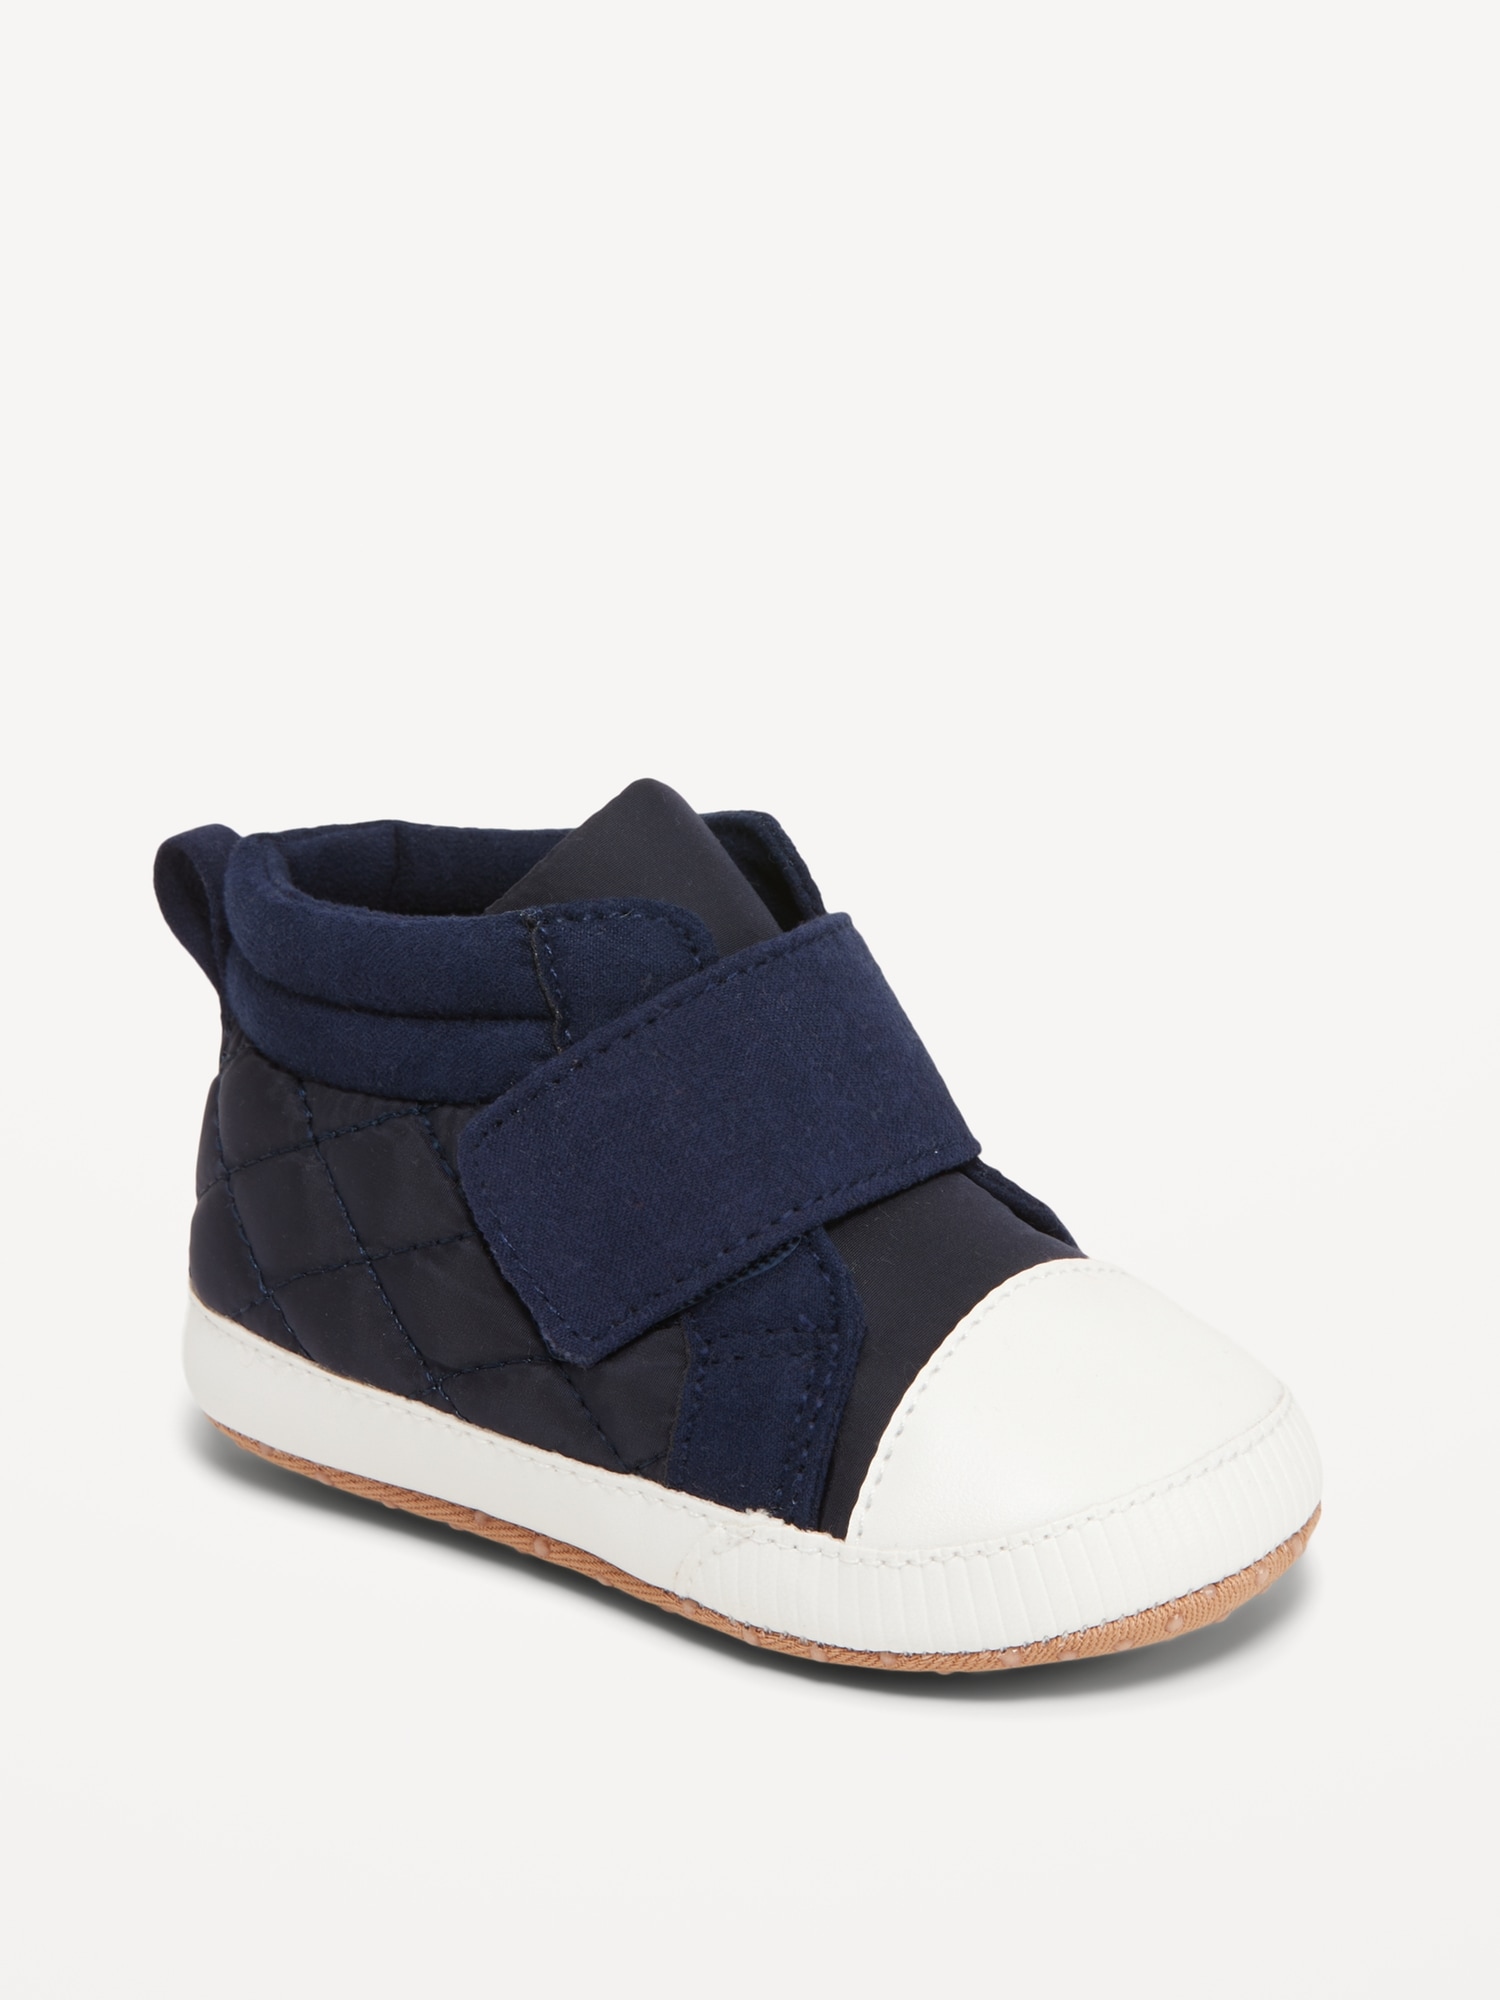 High-Top Quilted Textured Sneakers for Baby